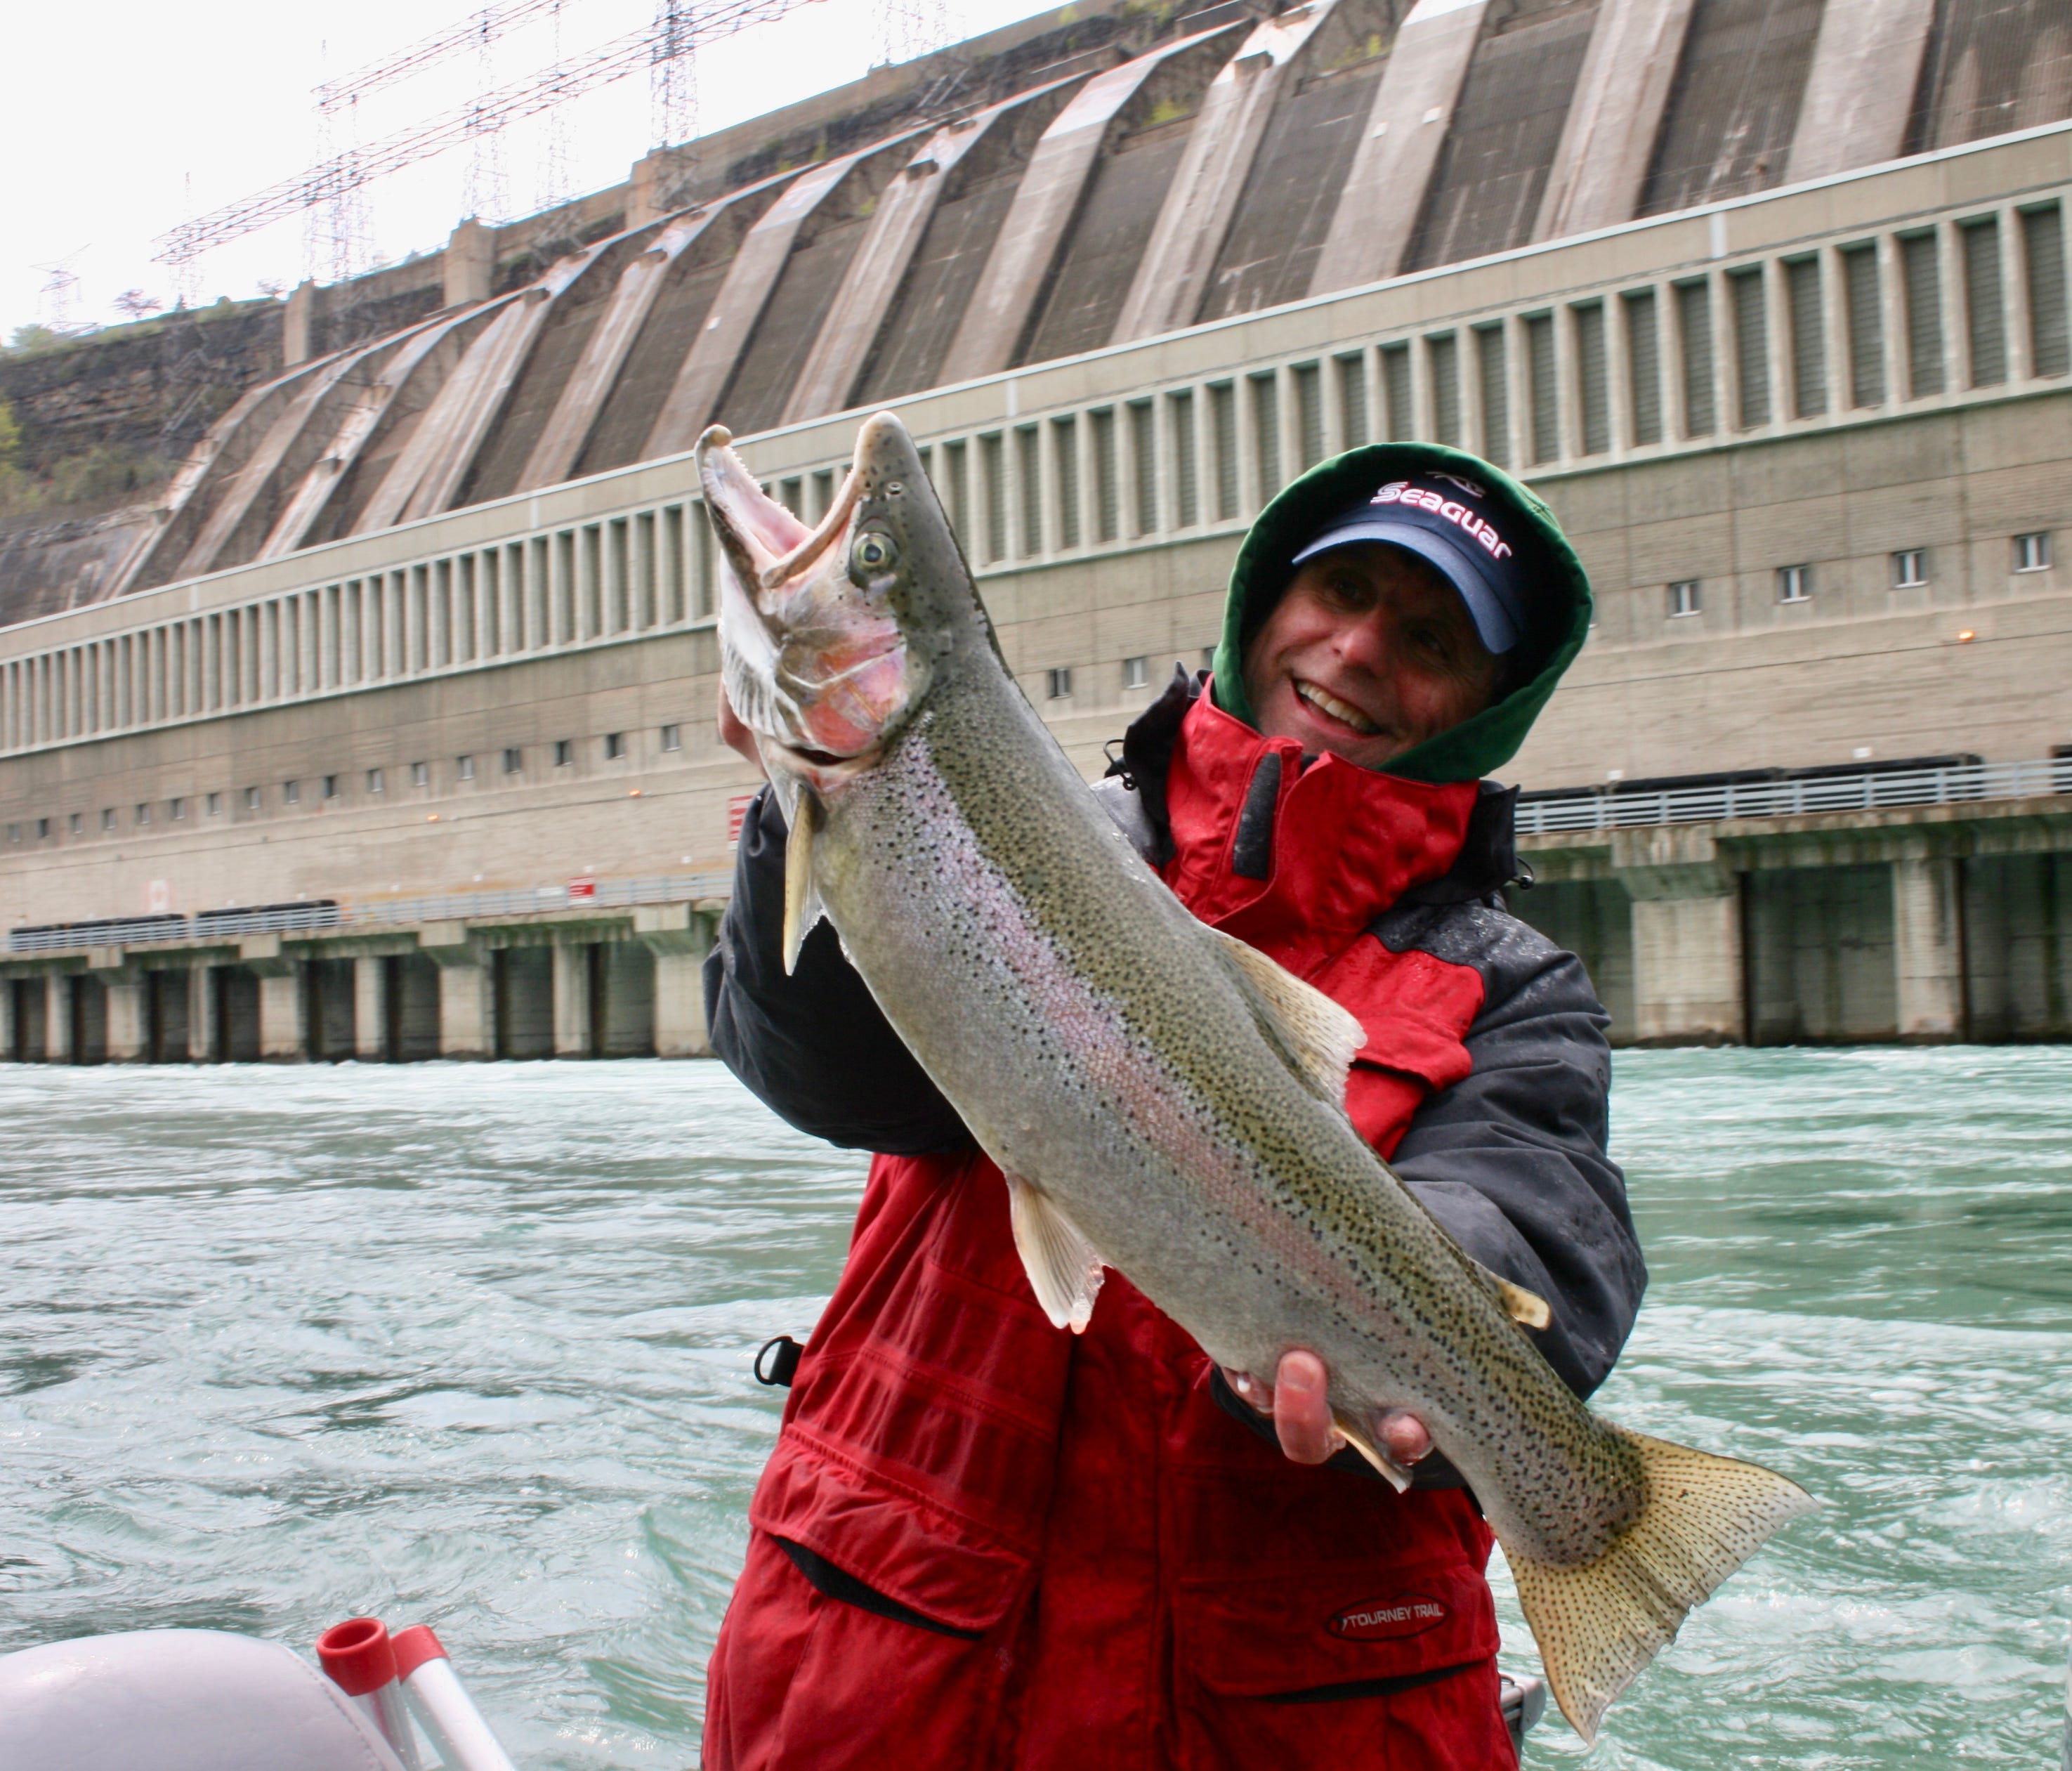 Capt. Joe Marra with a Niagara River steelhead. Water released from the Niagara Hydroelectric Power Station (seen in the background) adds to the swirling currents that challenge boaters.